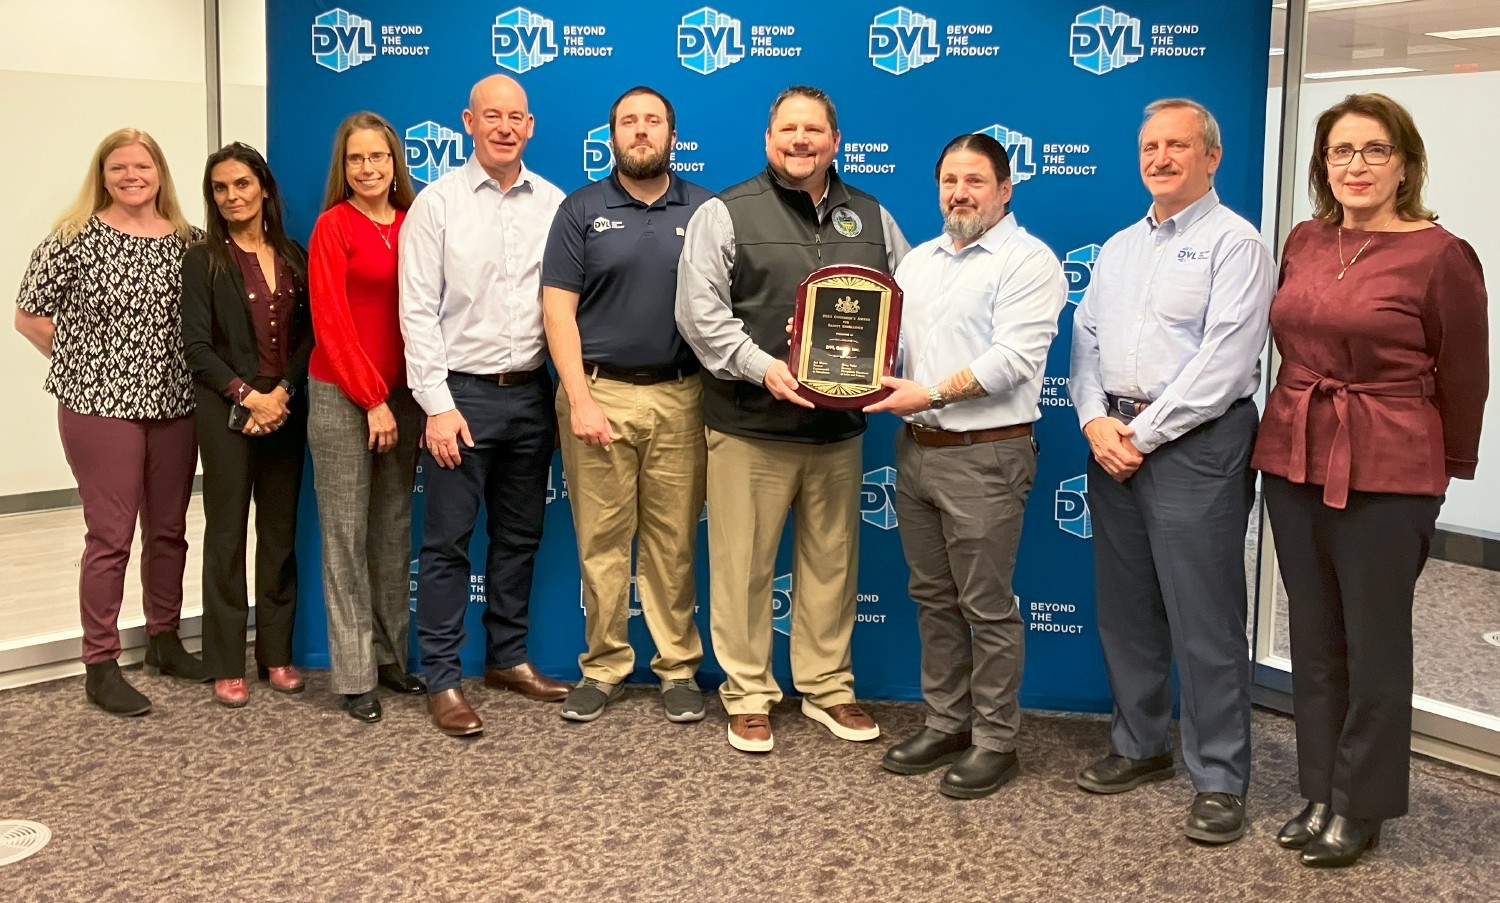 The PA Dept. of Labor honored DVL with the 2023 Governor’s Award for Safety Excellence. One of seven companies honored. 